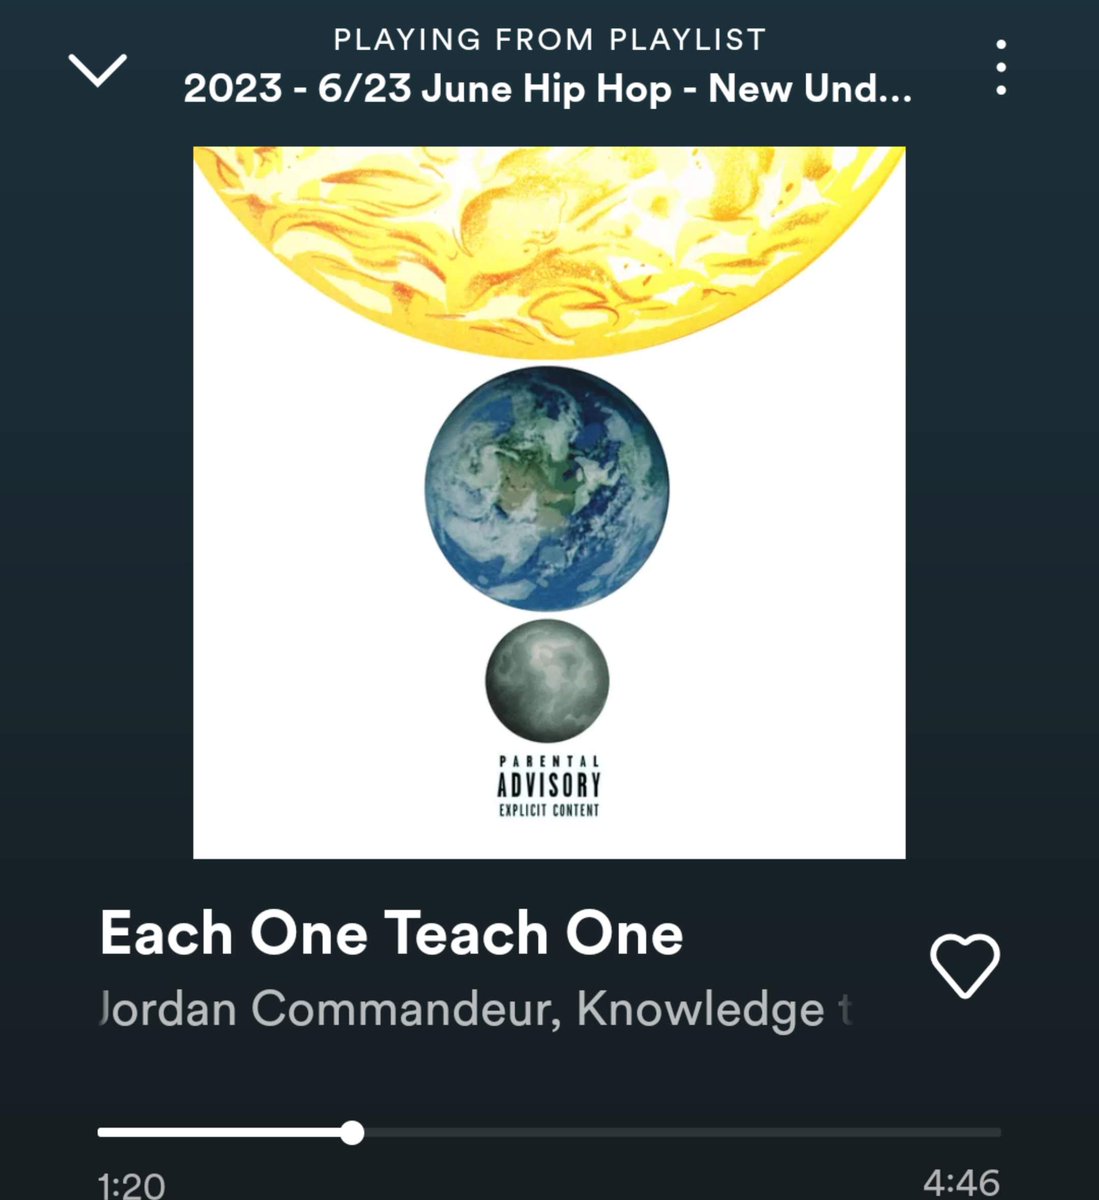 'Each One Teach One' by Jordan Commandeur, Knowledge the Pirate, RickHyde, 38 Spesh & Flee Lord, is 1 of the dope tracks on UHHM's June 2023 Spotify playlist 'New Underground Classic Rap' #NowPlaying #HipHop #HipHopHistory #Playlist #UHHM Listen & Follow: open.spotify.com/playlist/3LmaK…